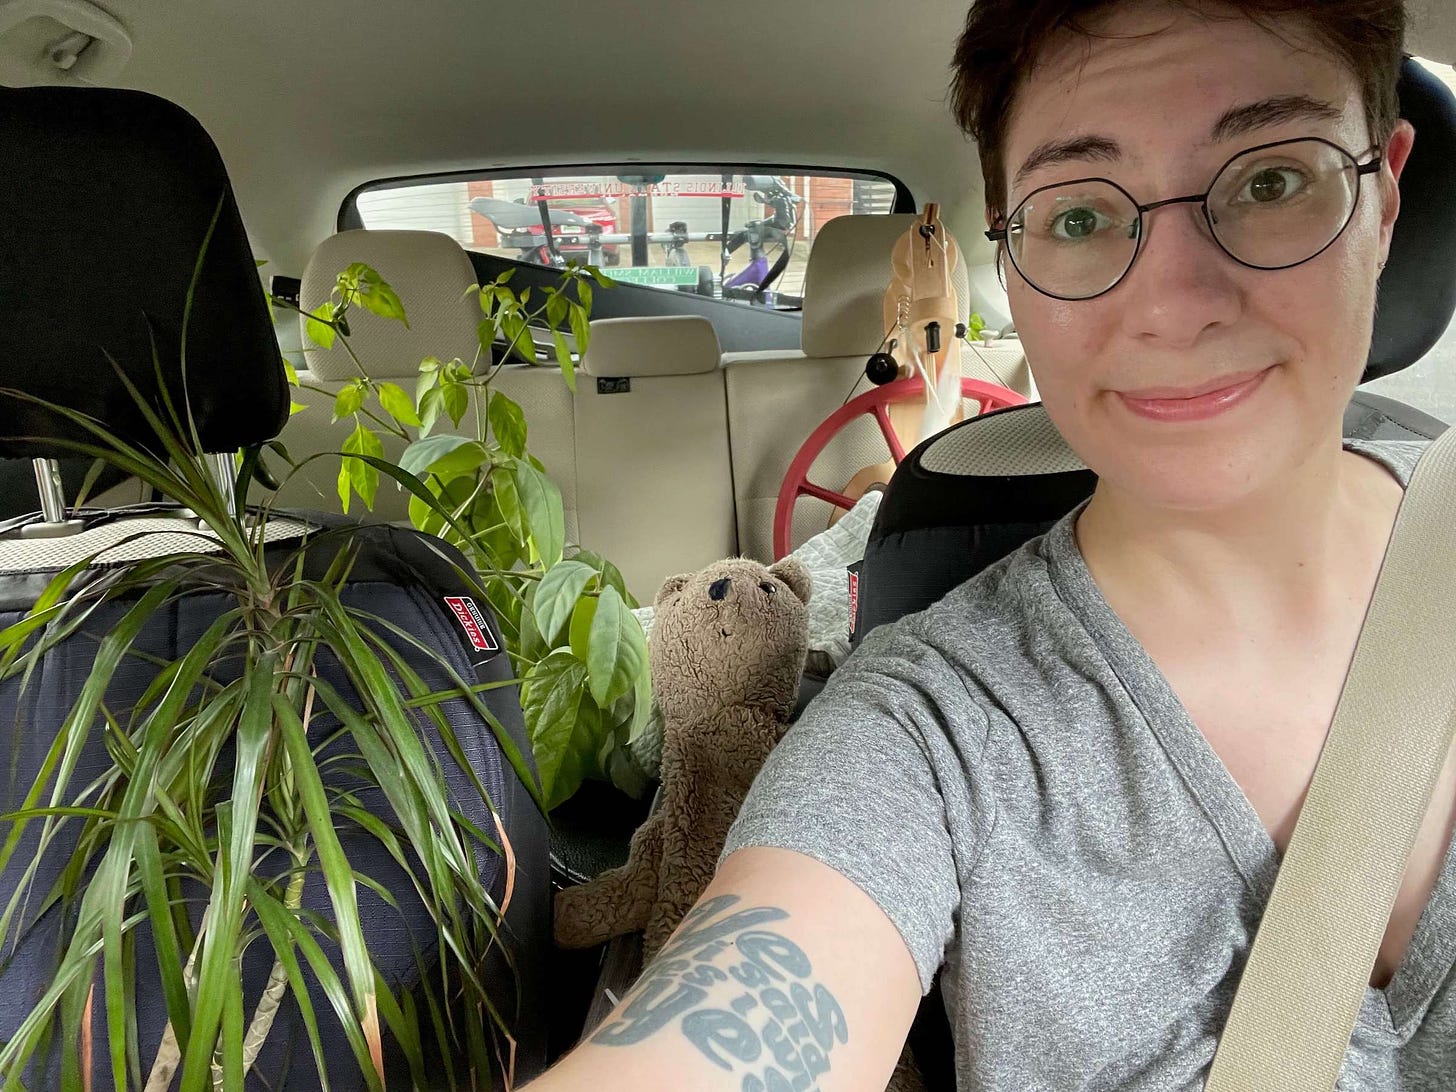 Shell in the driver's seat of their parked car, taking a selfie. The car is packed full of plants, a spinning wheel. A stuffed bear is visible in the middle seat. Through the rear window you can see a bicycle strapped to the back of the car.